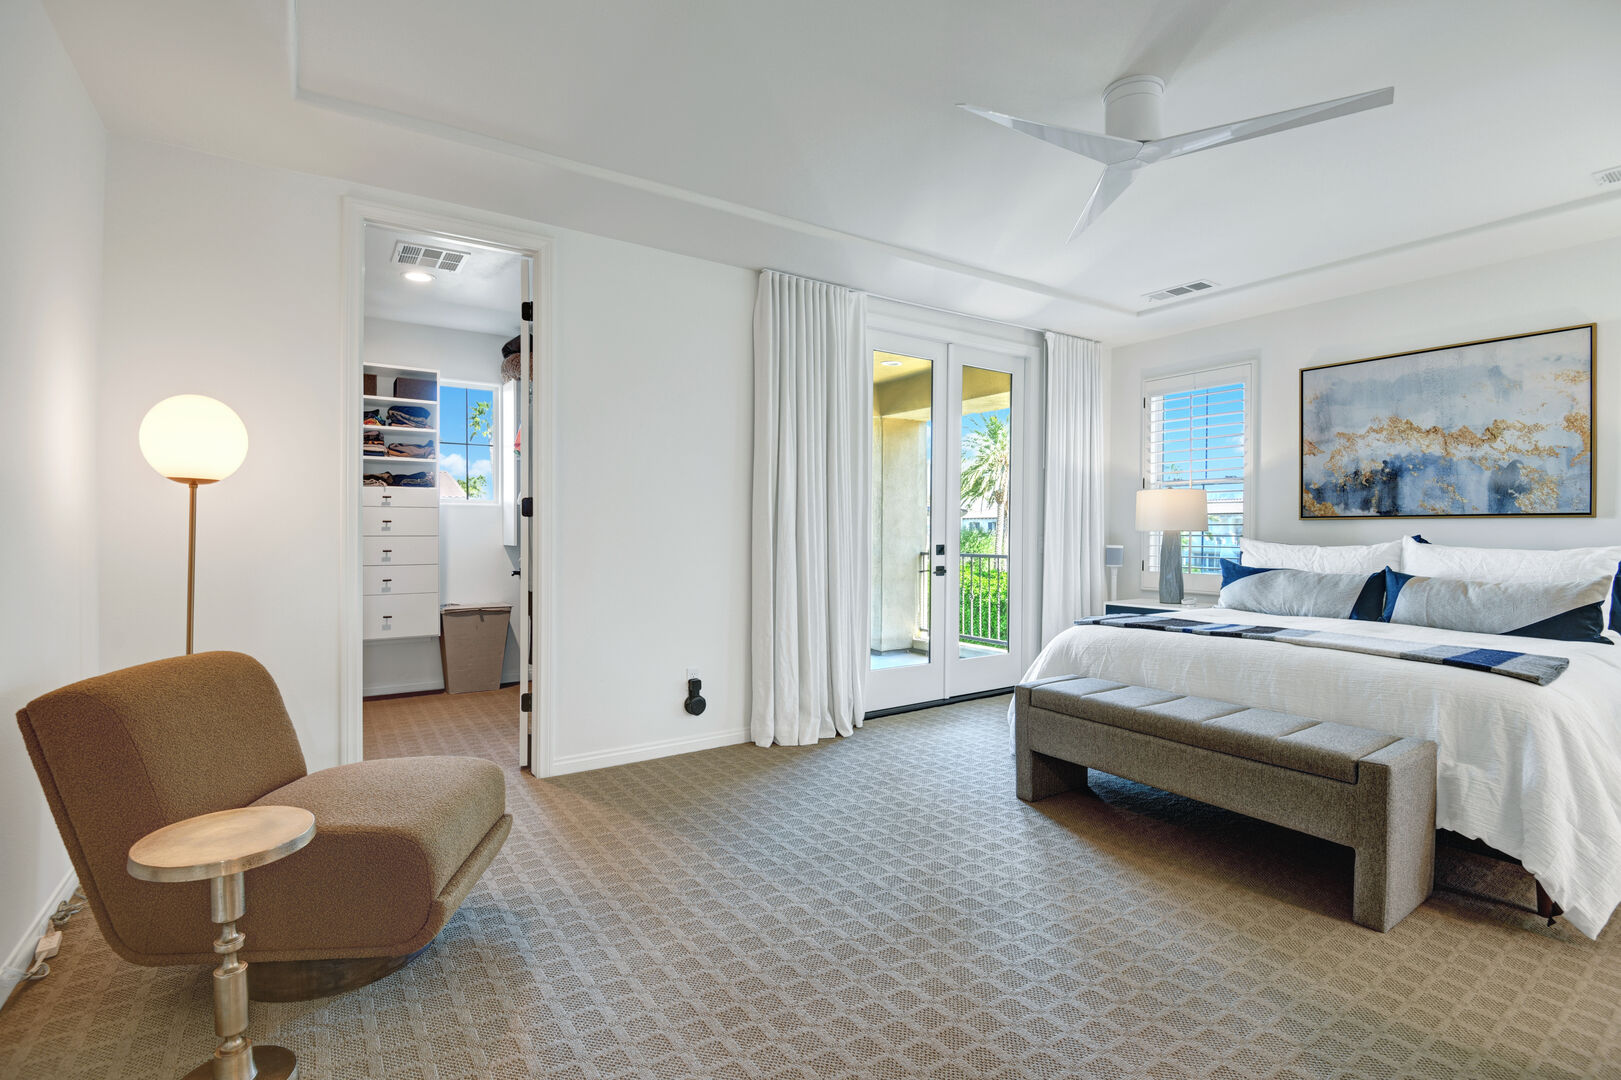 Master Suite 1 features a luxurious CAL king-size bed for the ultimate comfort and relaxation.